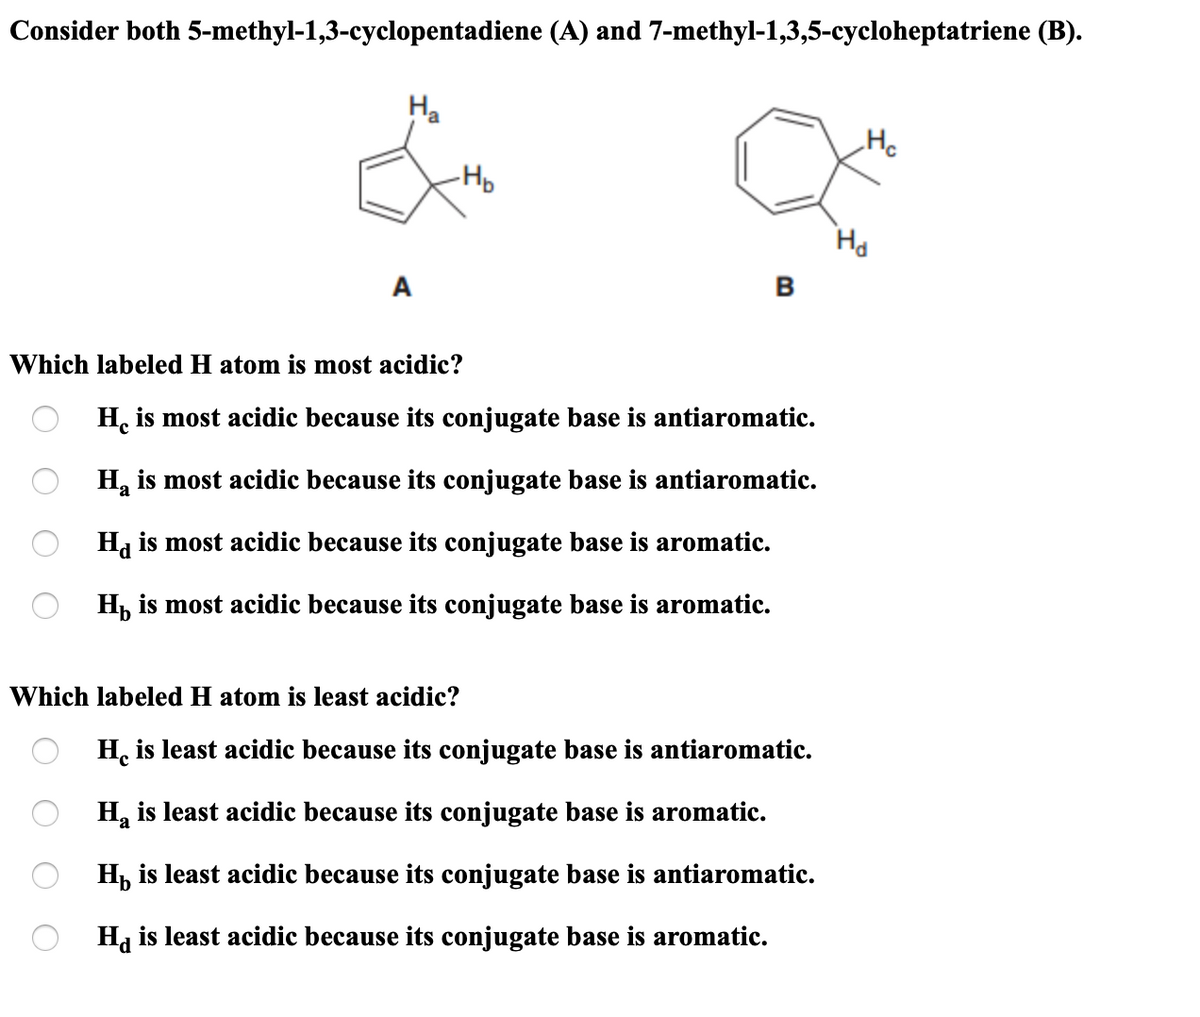 Consider both 5-methyl-1,3-cyclopentadiene (A) and 7-methyl-1,3,5-cycloheptatriene (B).
На
He
-Hp
Ha
A
в
Which labeled H atom is most acidic?
H, is most acidic because its conjugate base is antiaromatic.
H, is most acidic because its conjugate base is antiaromatic.
Hj is most acidic because its conjugate base is aromatic.
H, is most acidic because its conjugate base is aromatic.
Which labeled H atom is least acidic?
H. is least acidic because its conjugate base is antiaromatic.
H, is least acidic because its conjugate base is aromatic.
H, is least acidic because its conjugate base is antiaromatic.
Ha is least acidic because its conjugate base is aromatic.
